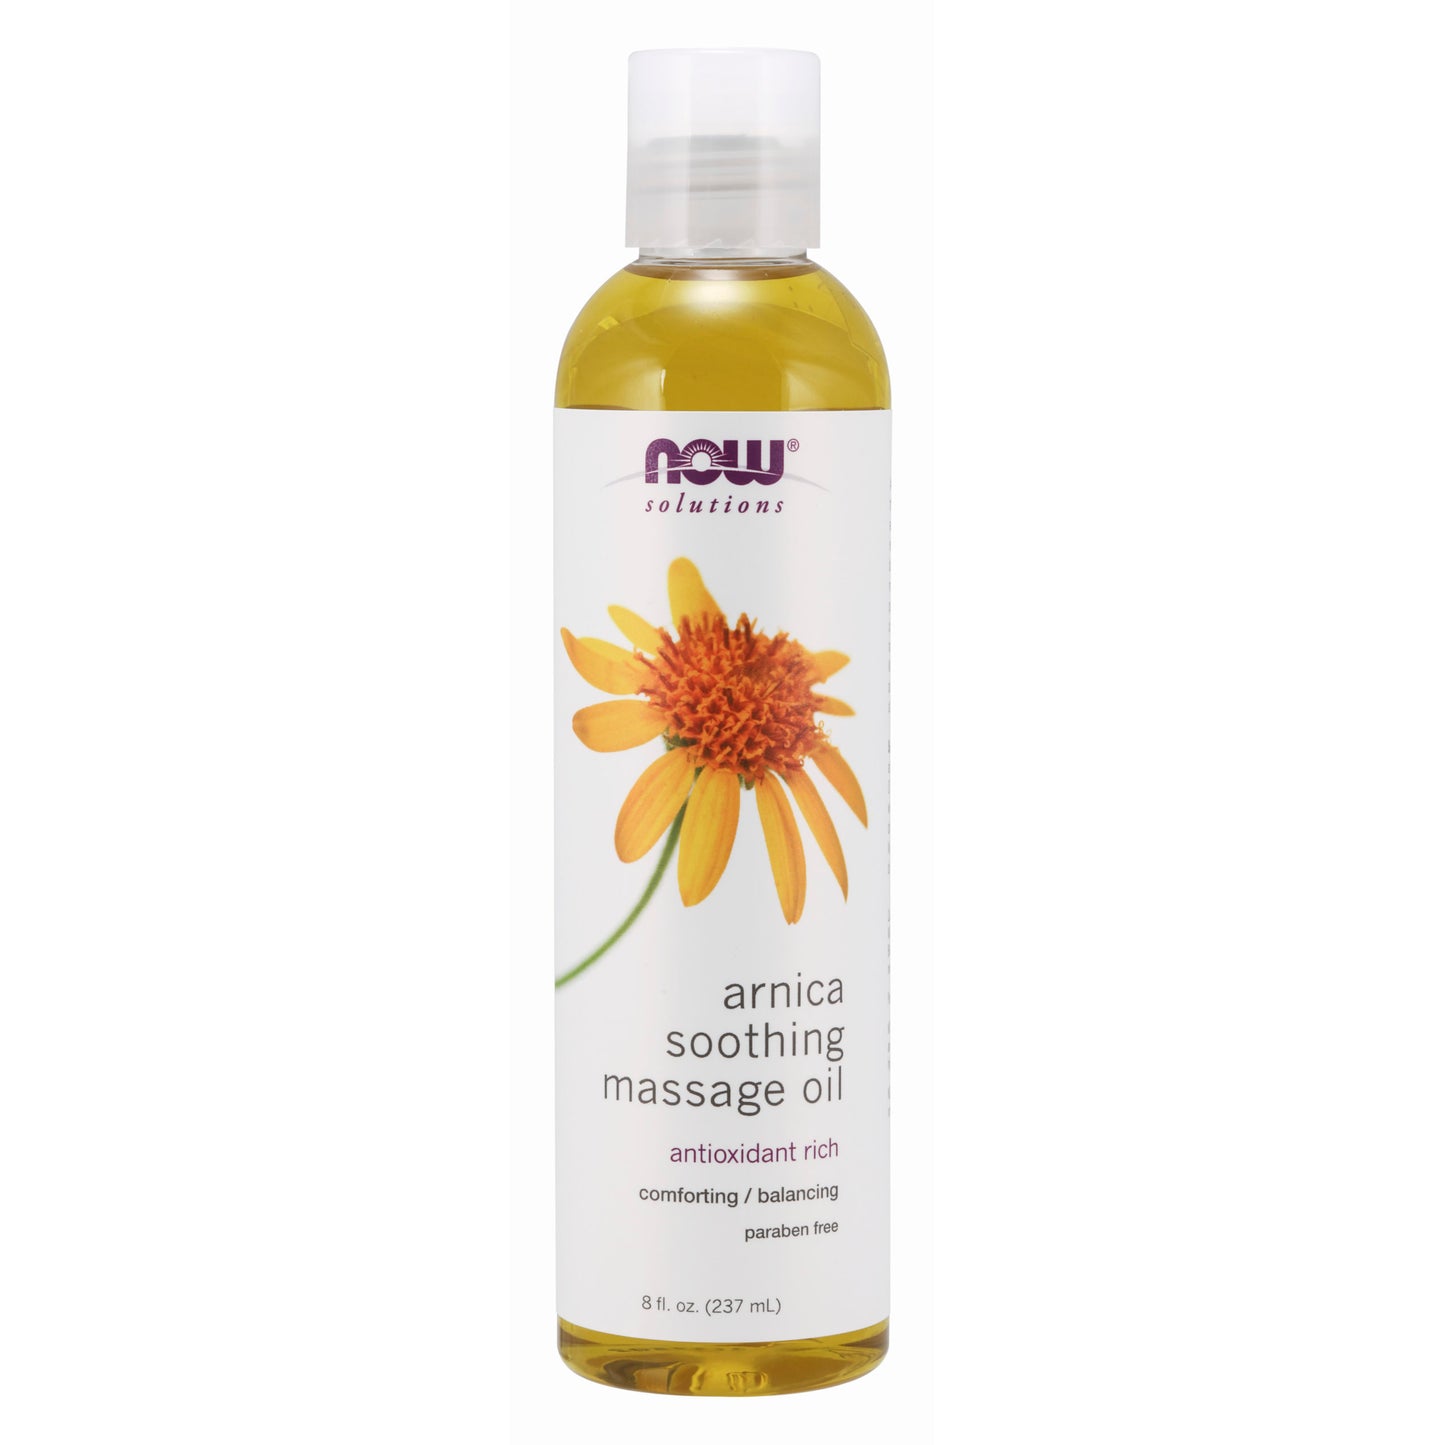 Arnica Soothing Massage Oil (237 ml)